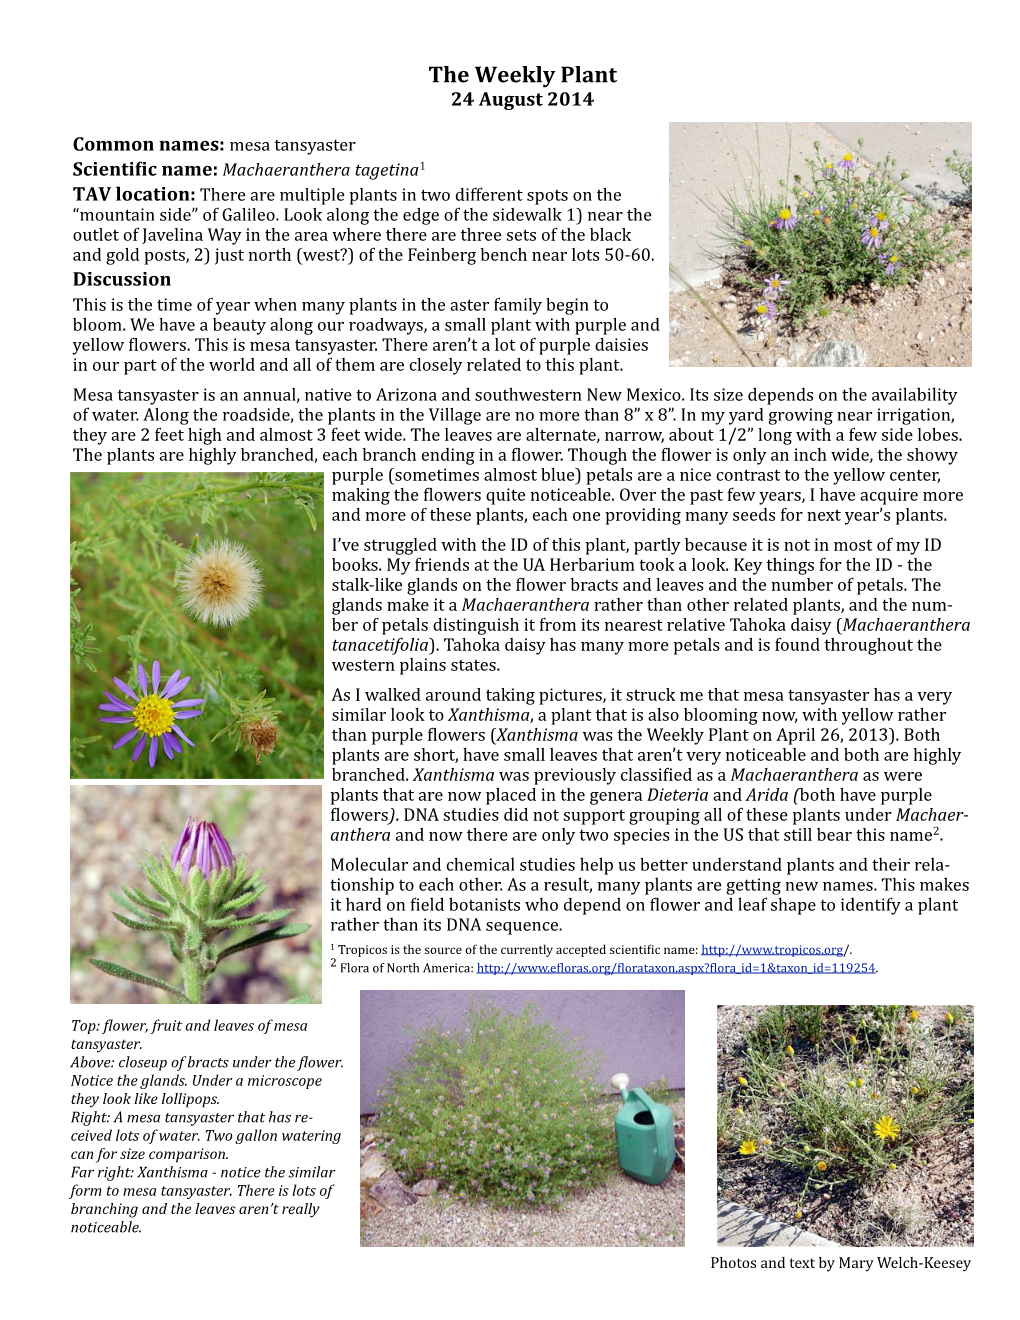 The Weekly Plant 24Aug2014